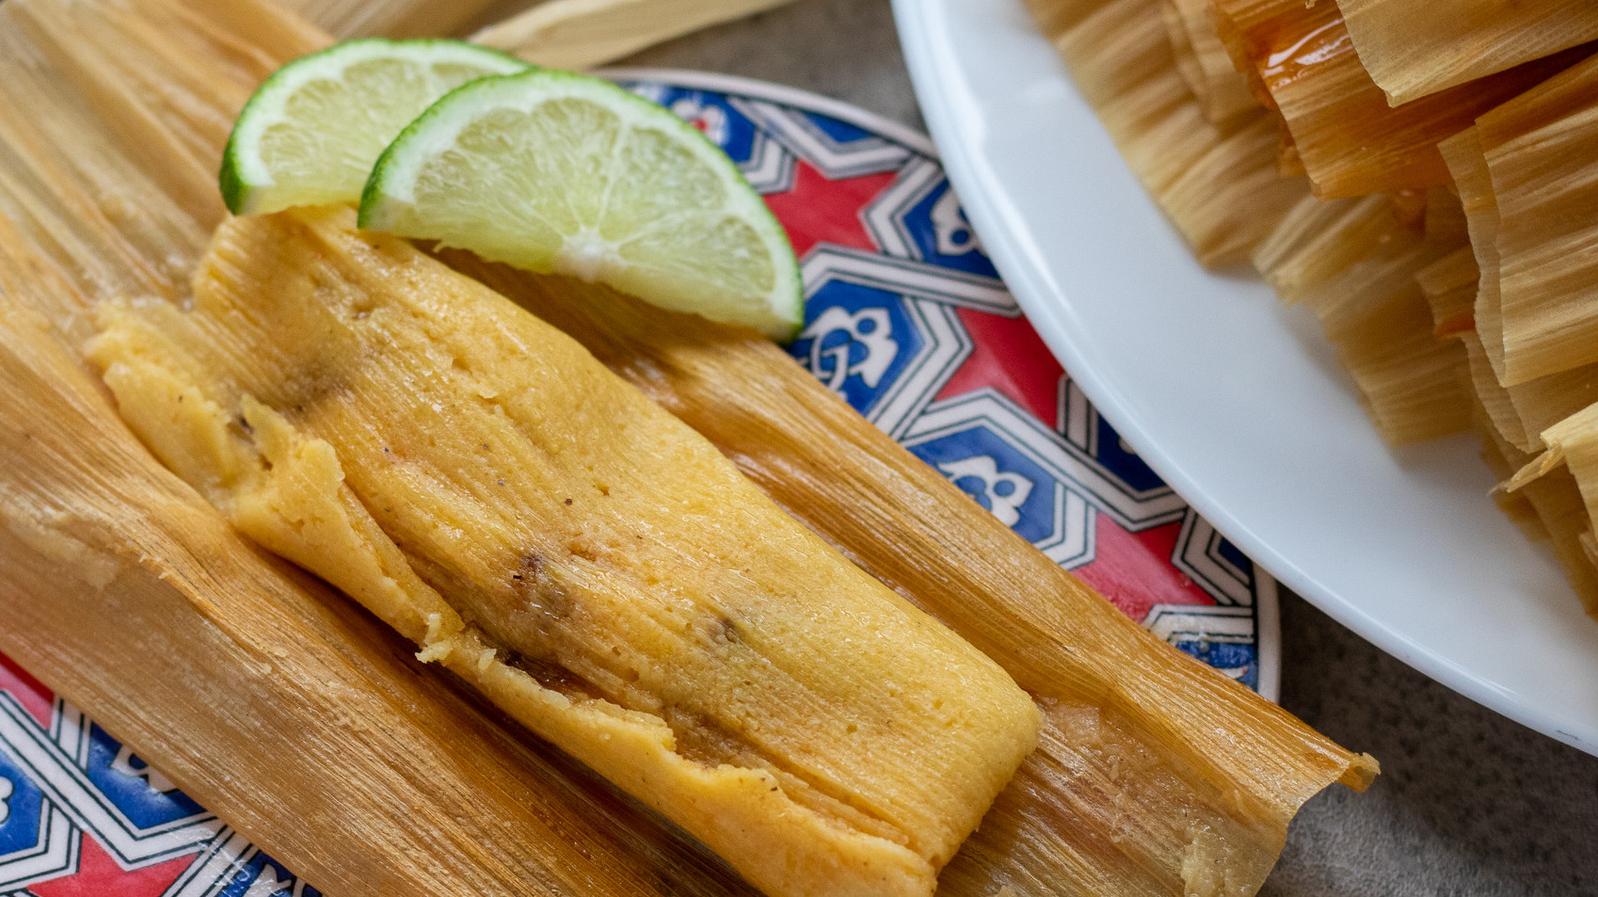  These tamales will transport you straight to Mexico.